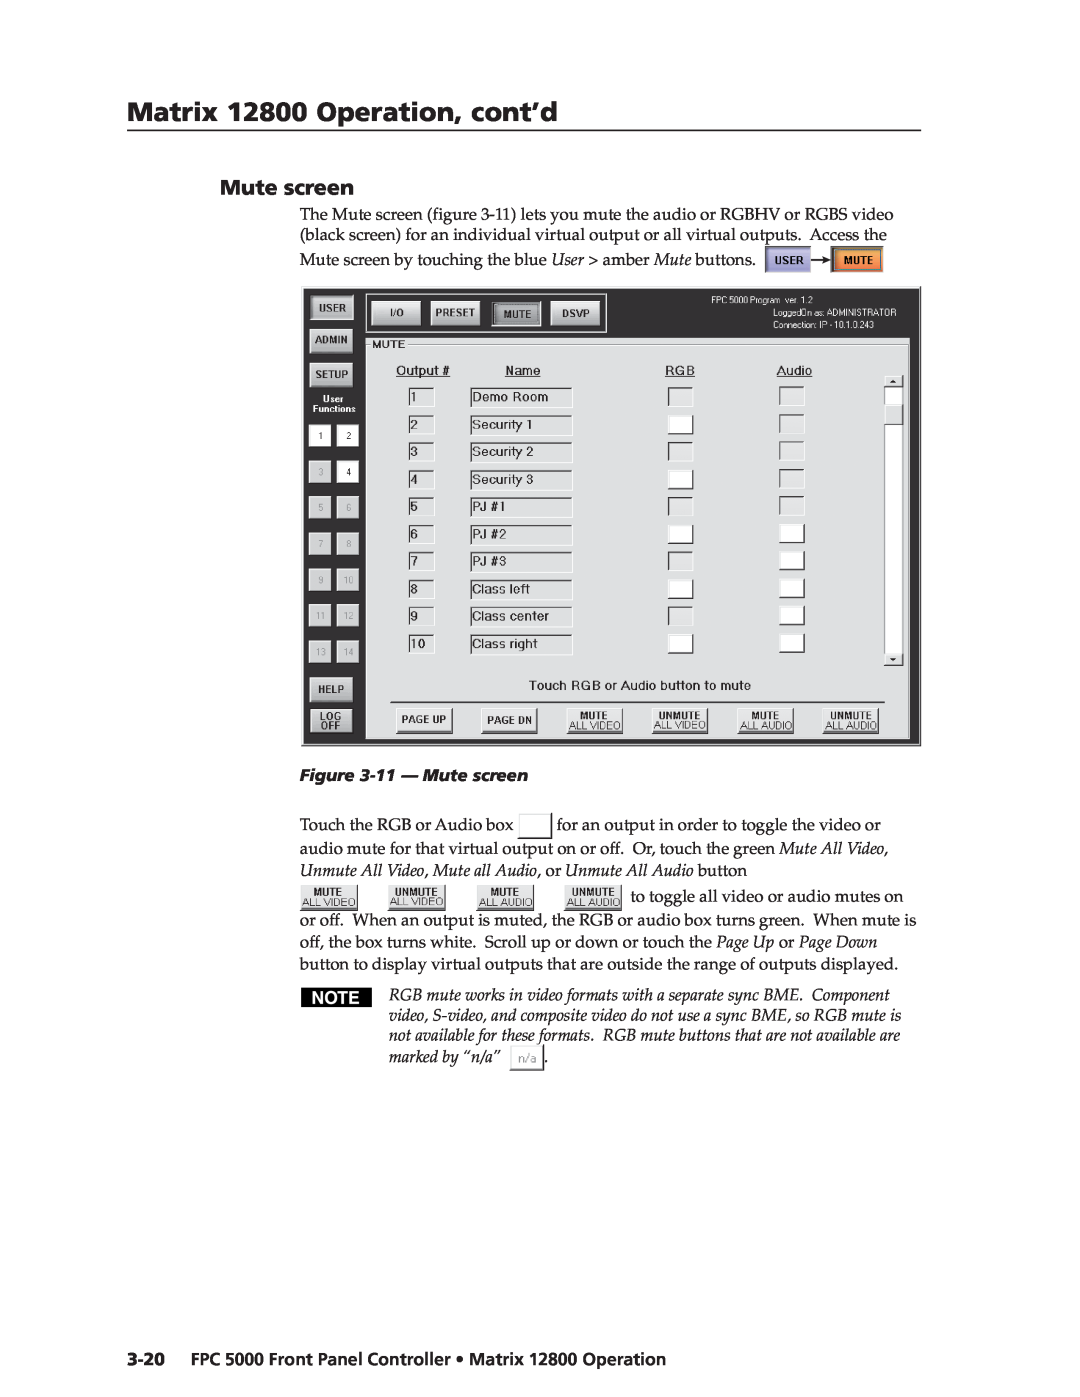 Extron electronic manual 11 - Mute screen, marked by “n/a”, FPC 5000 Front Panel Controller Matrix 12800 Operation 